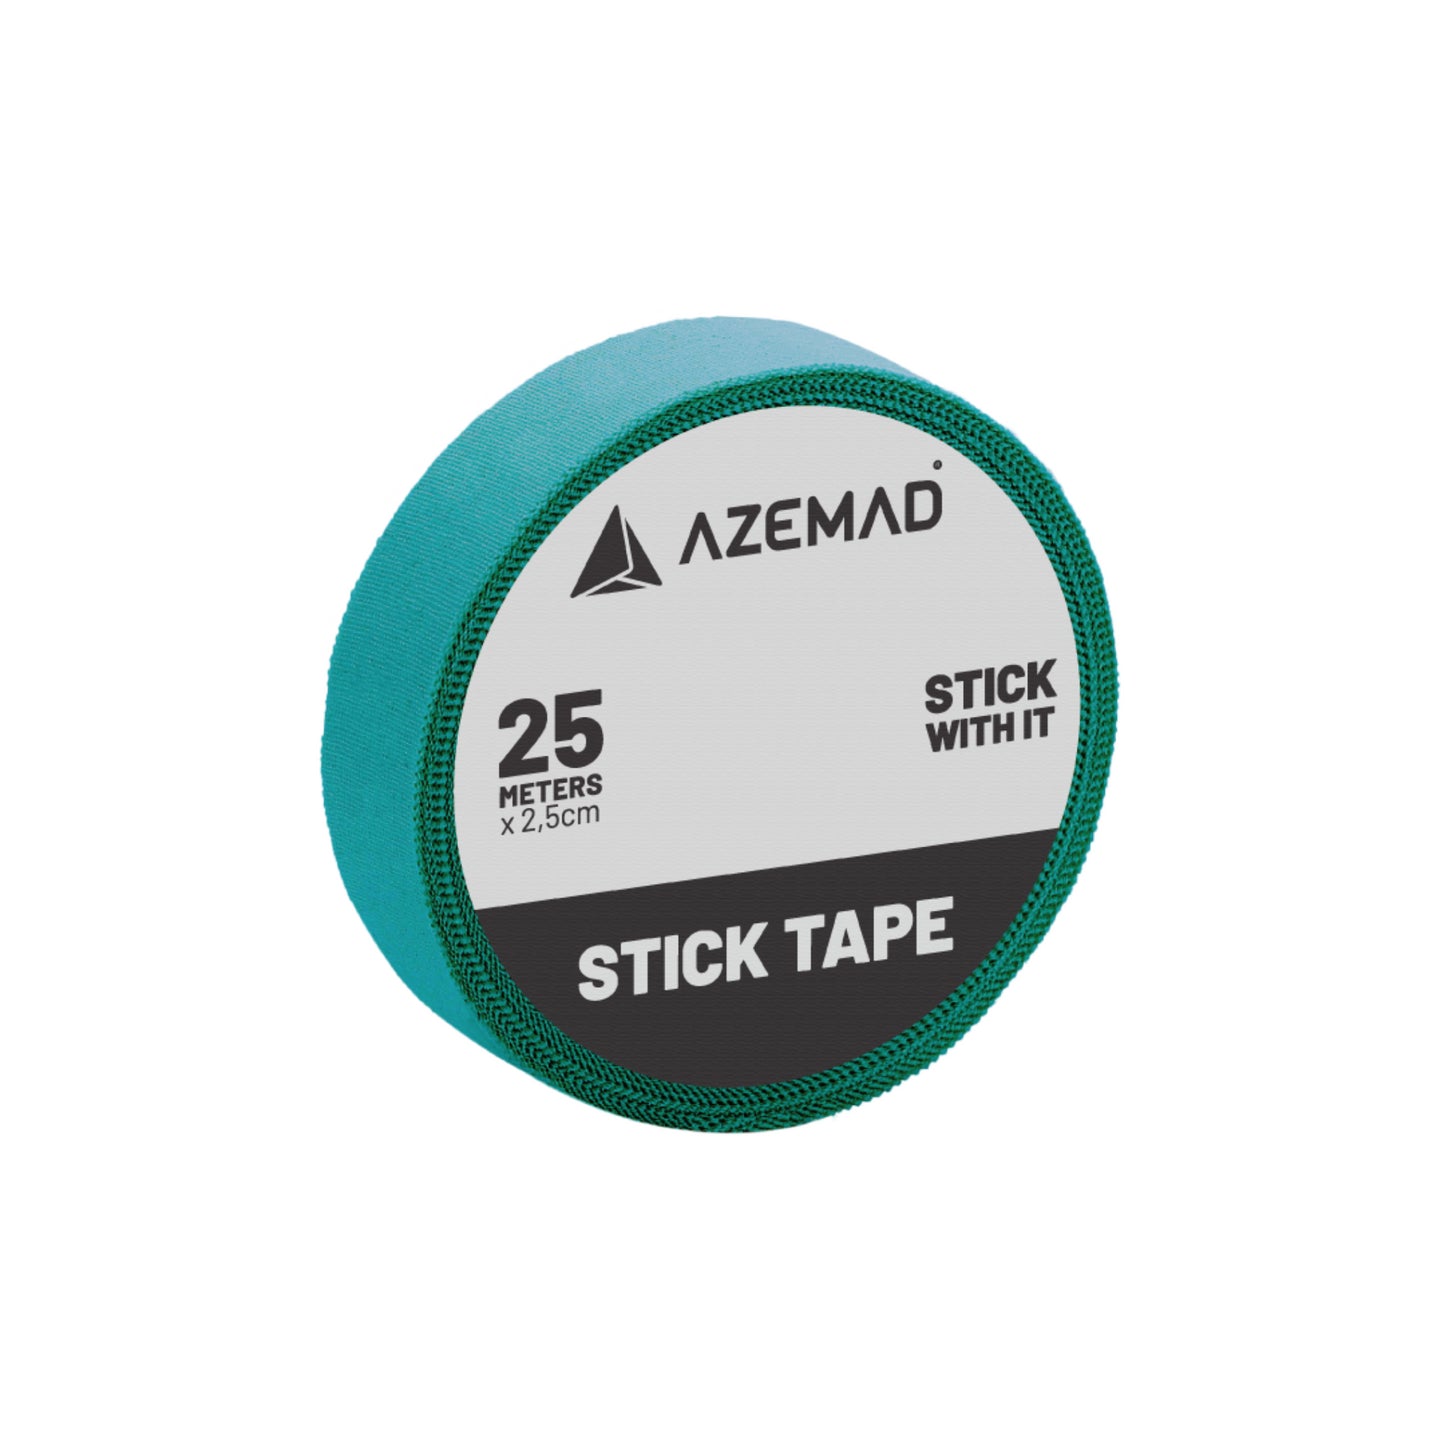 AZEMAD Tape for Sticks (25m)